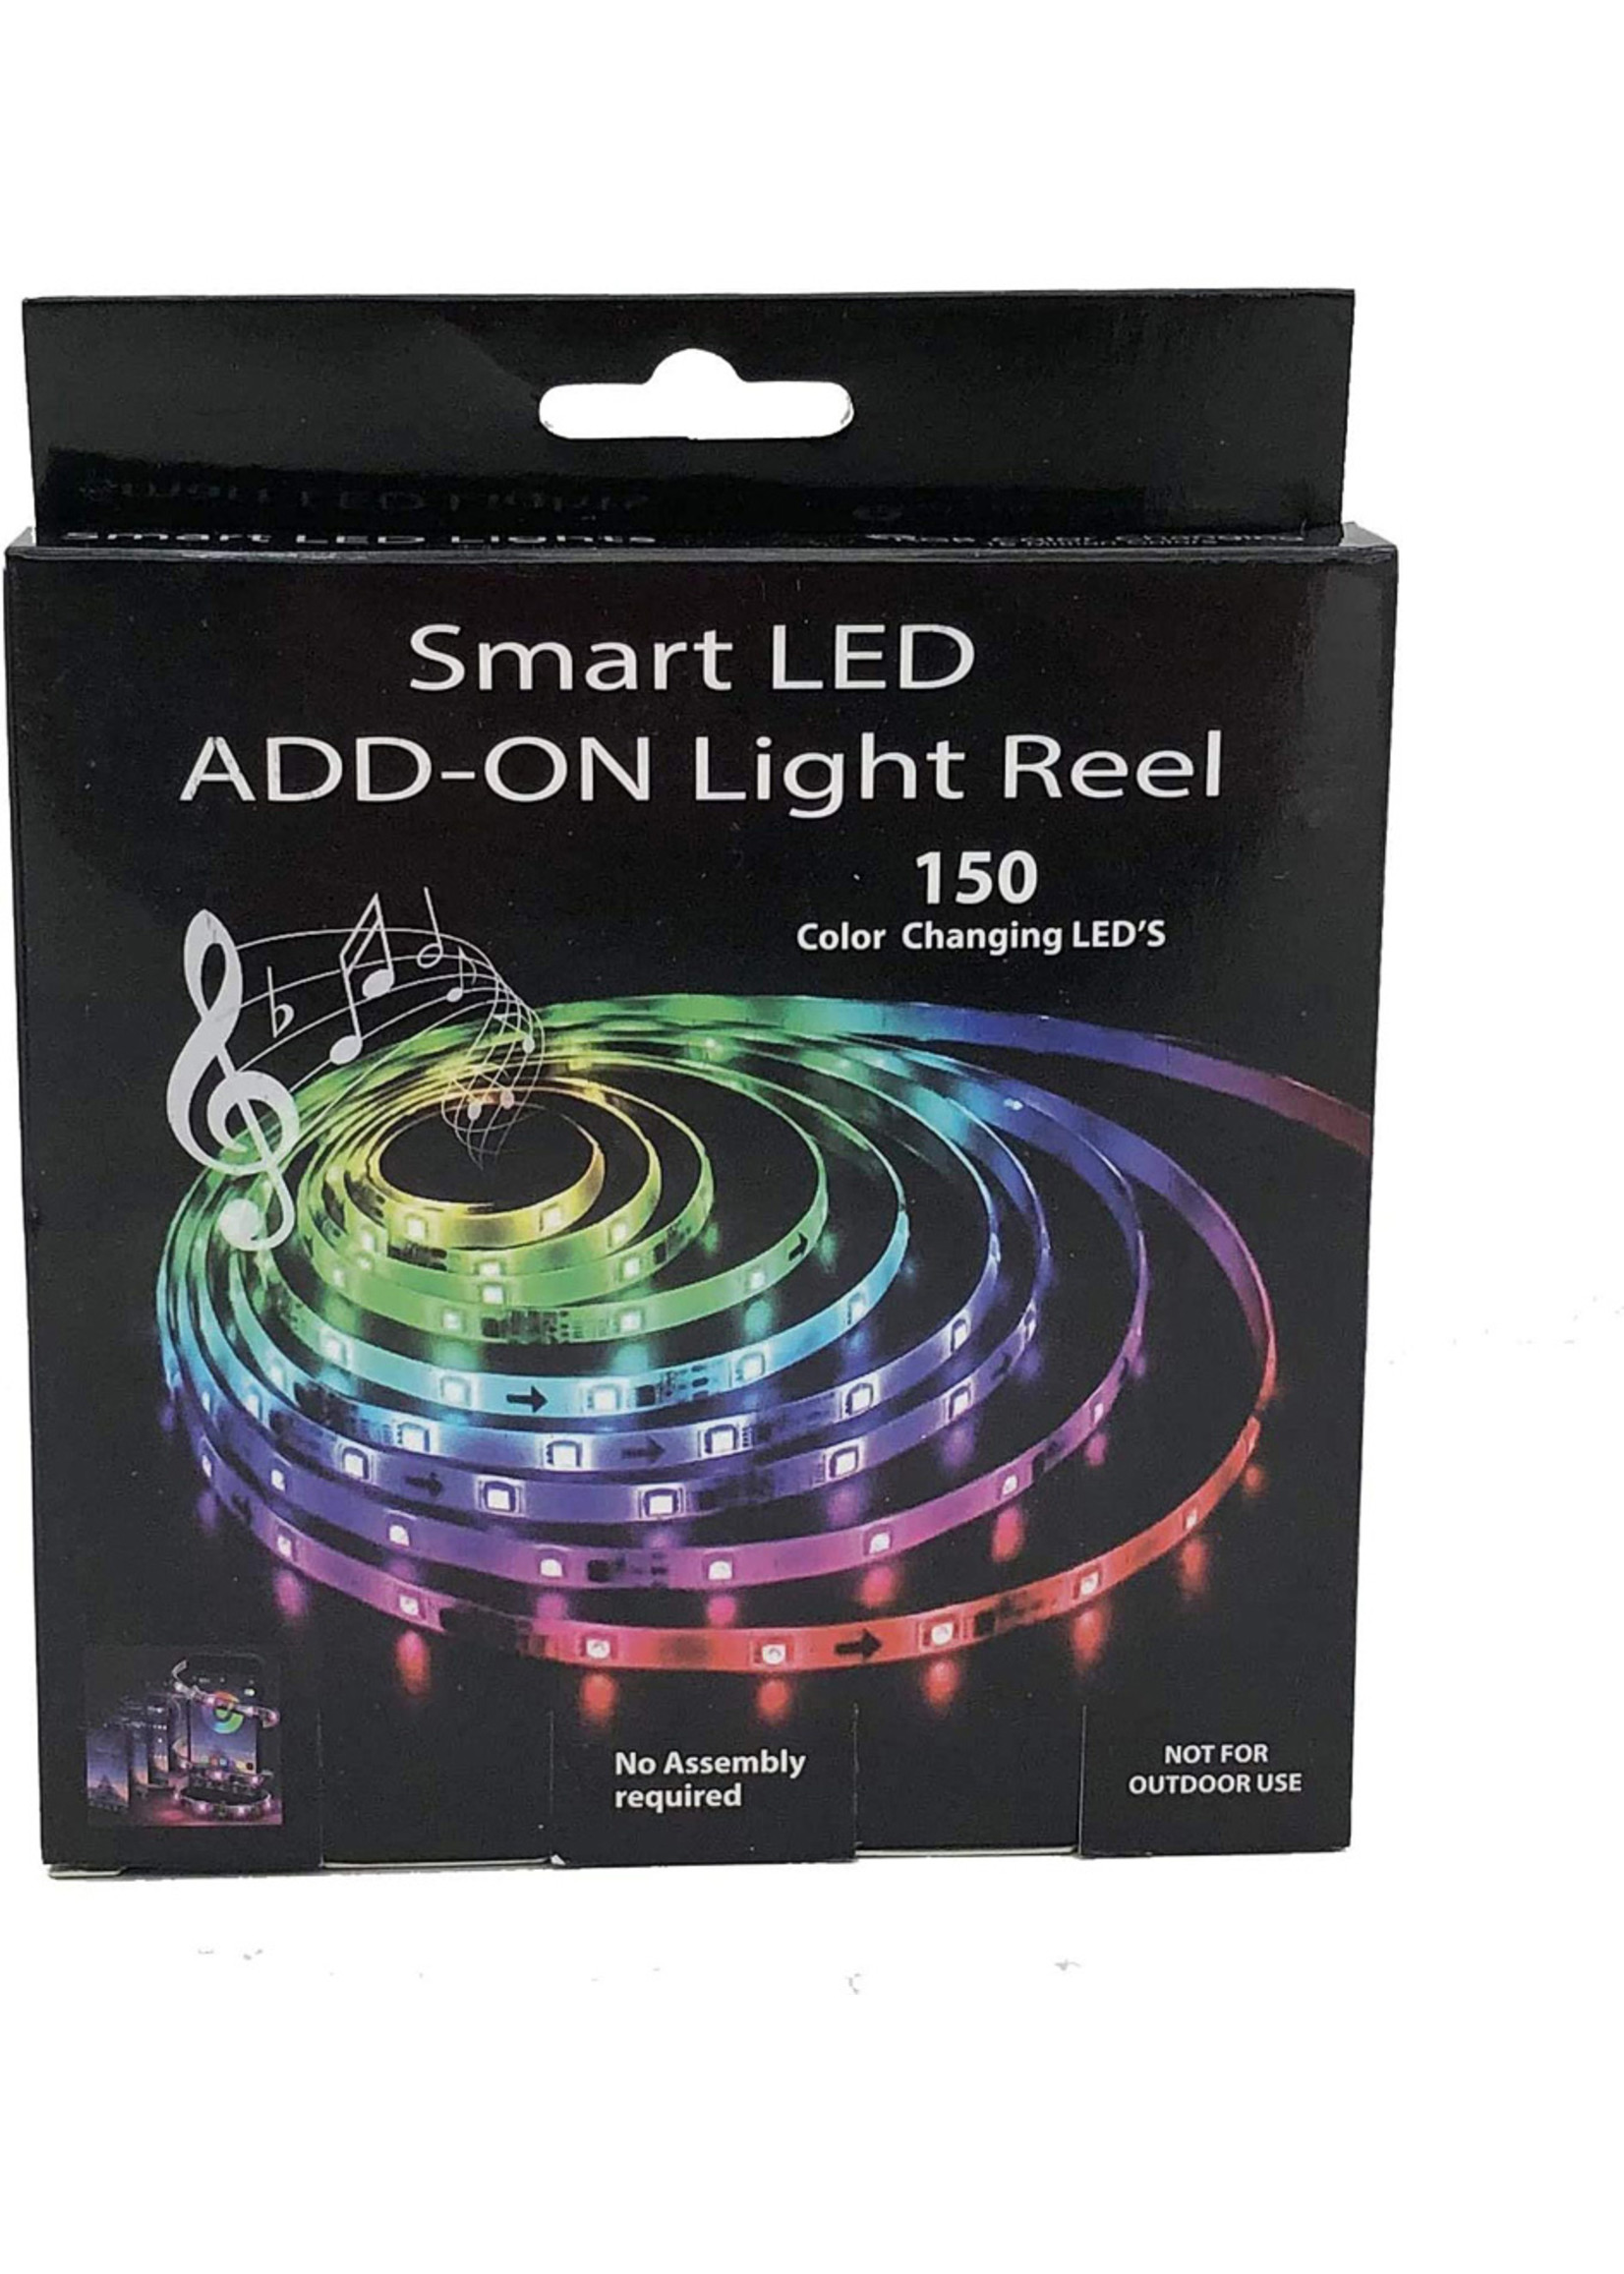 Leading Edge Smart LED Add-On Reel - 150 Color Changing LED's